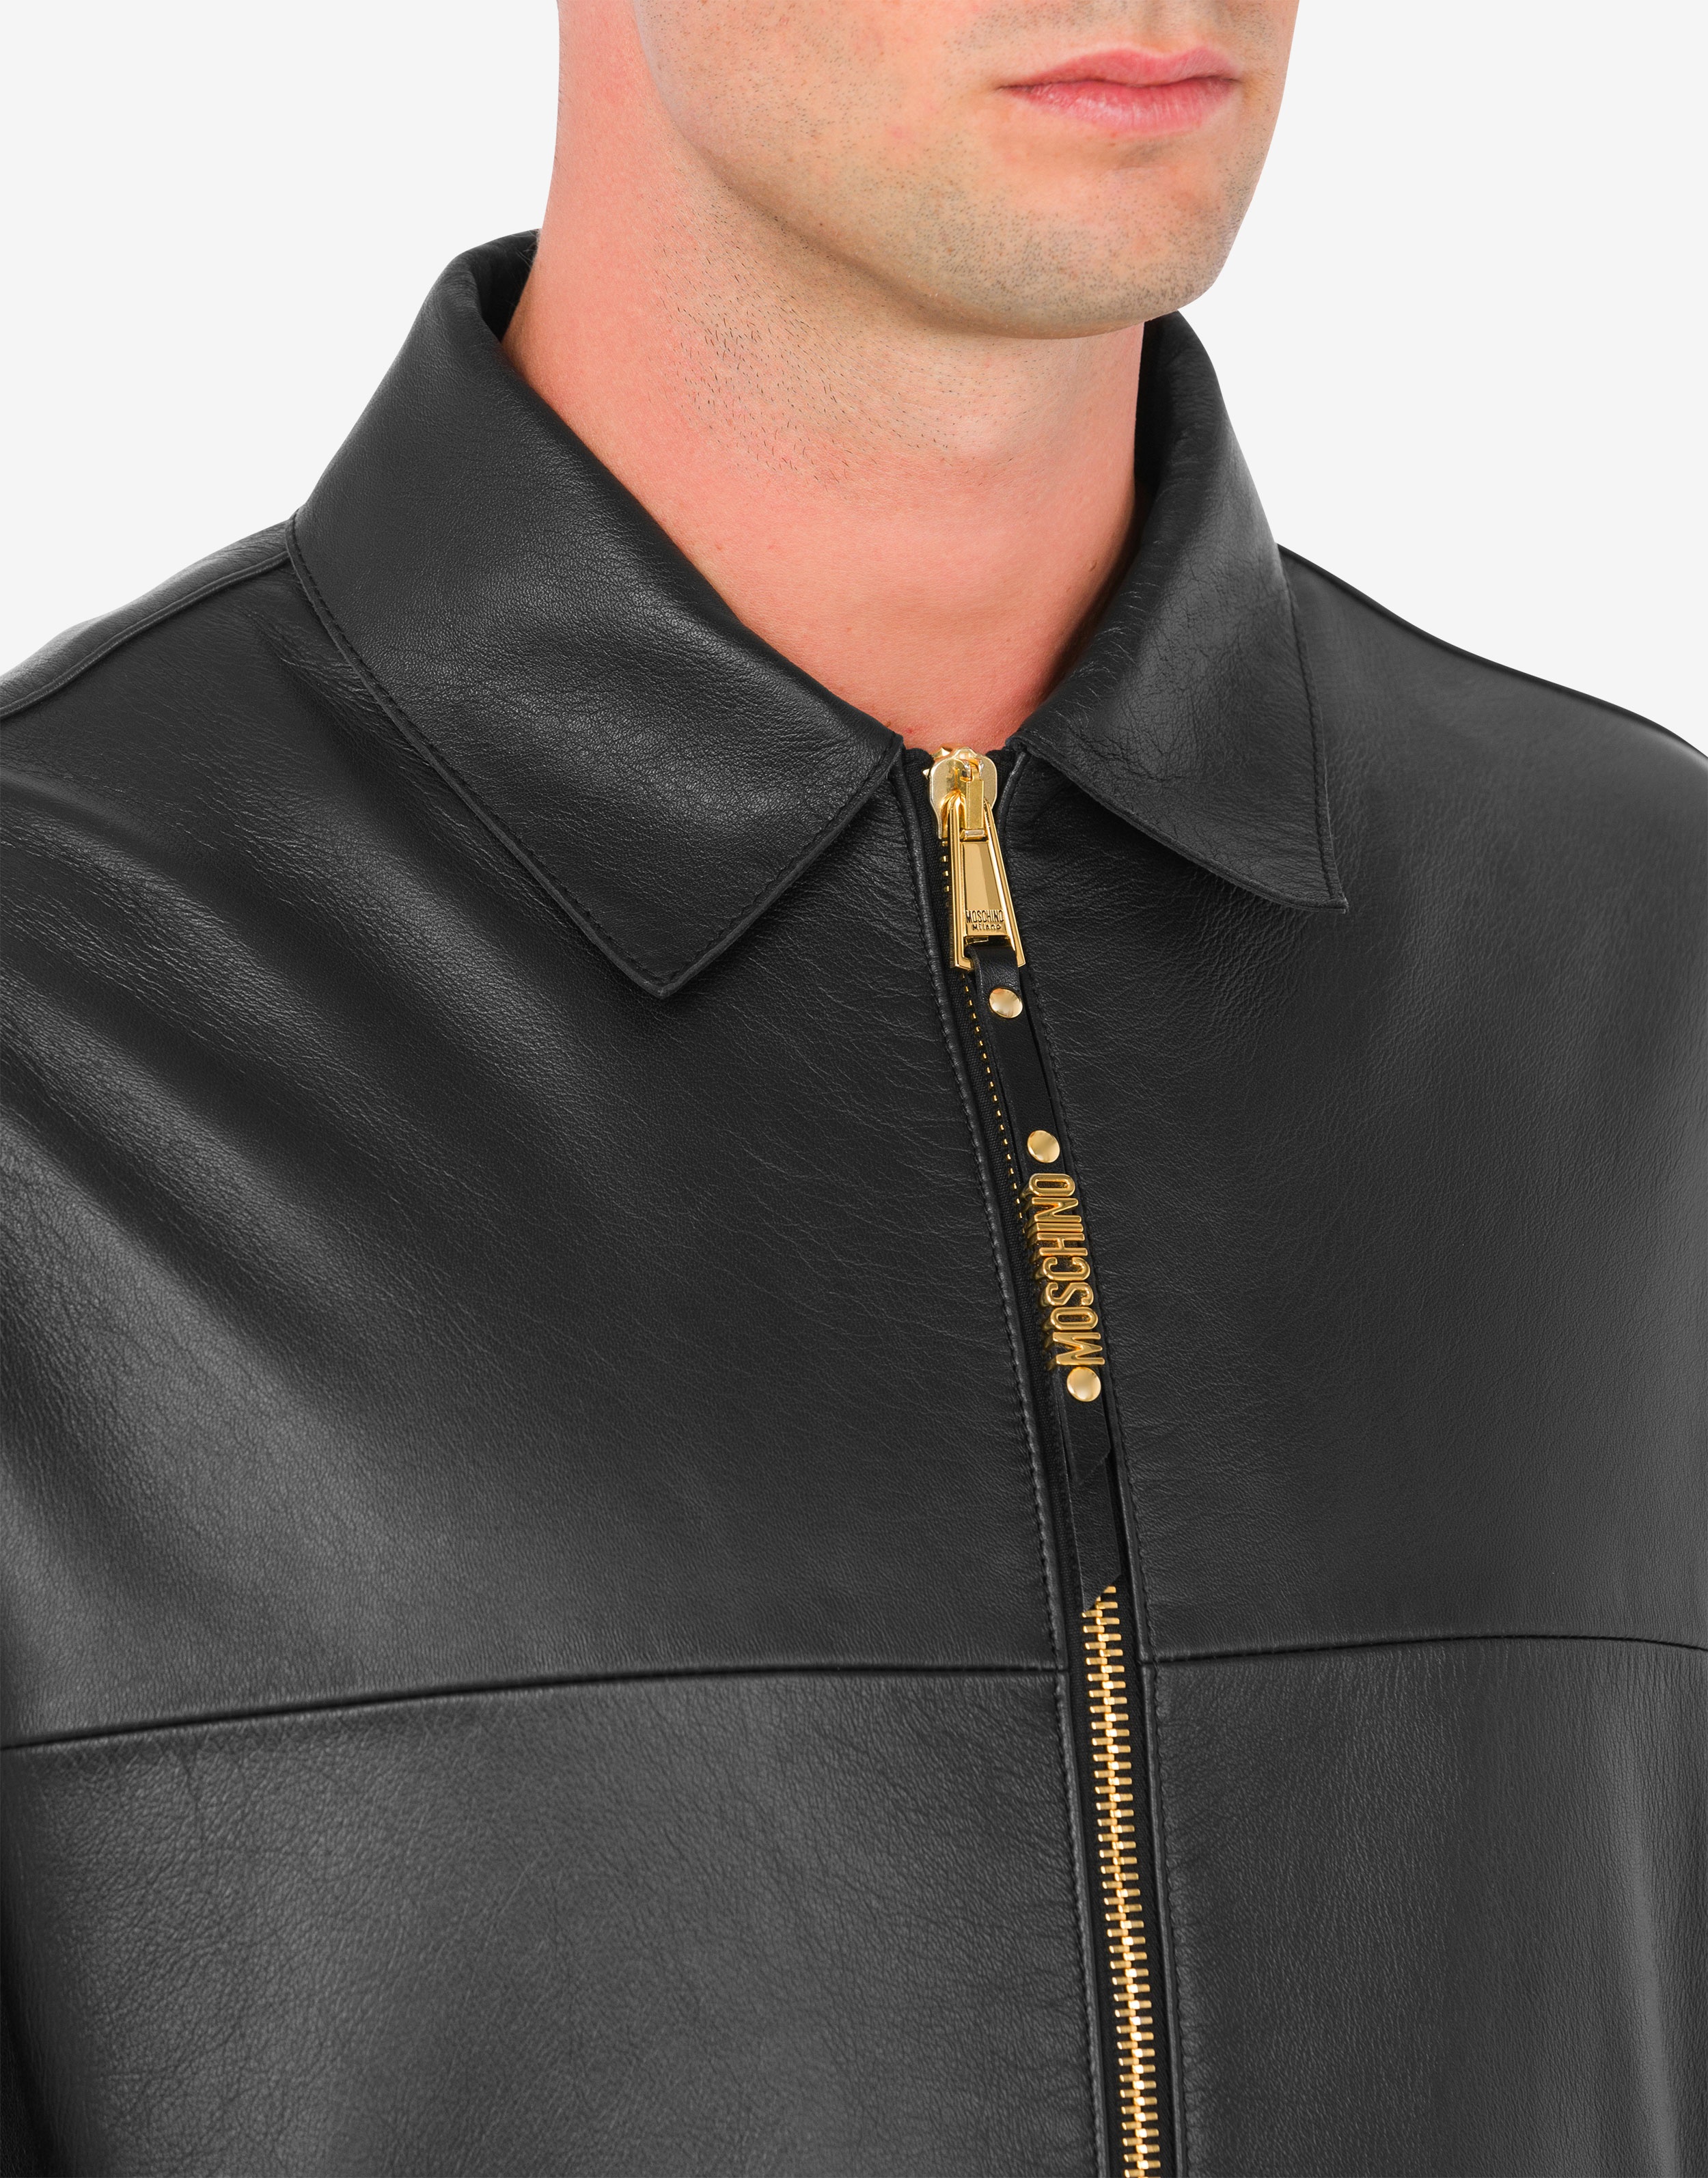 MINI LETTERING PULLER ZIP NAPPA LEATHER JACKET - 4